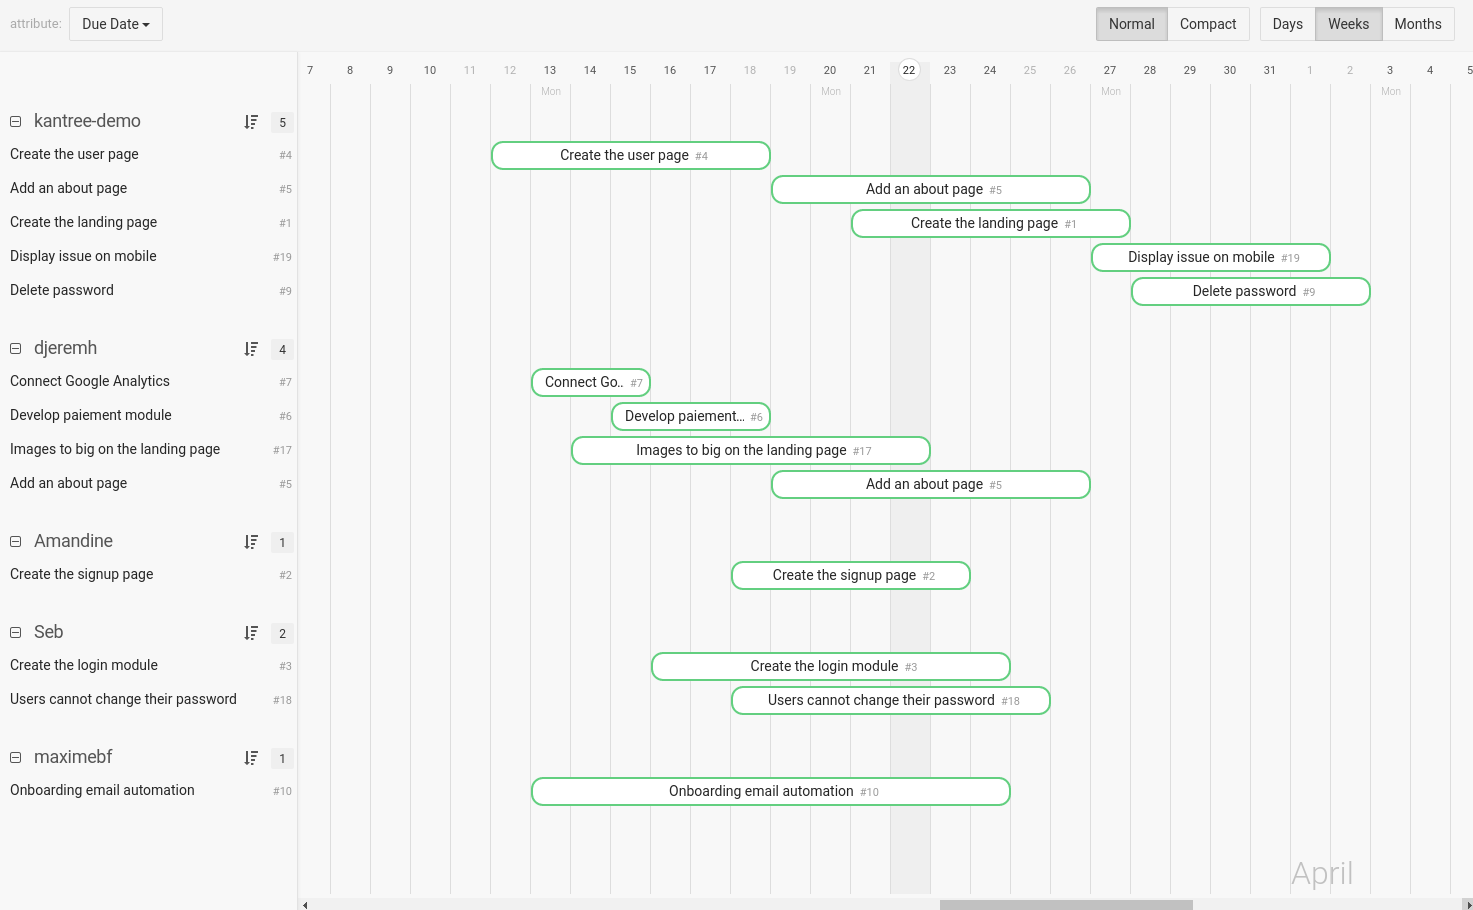 the timeline view